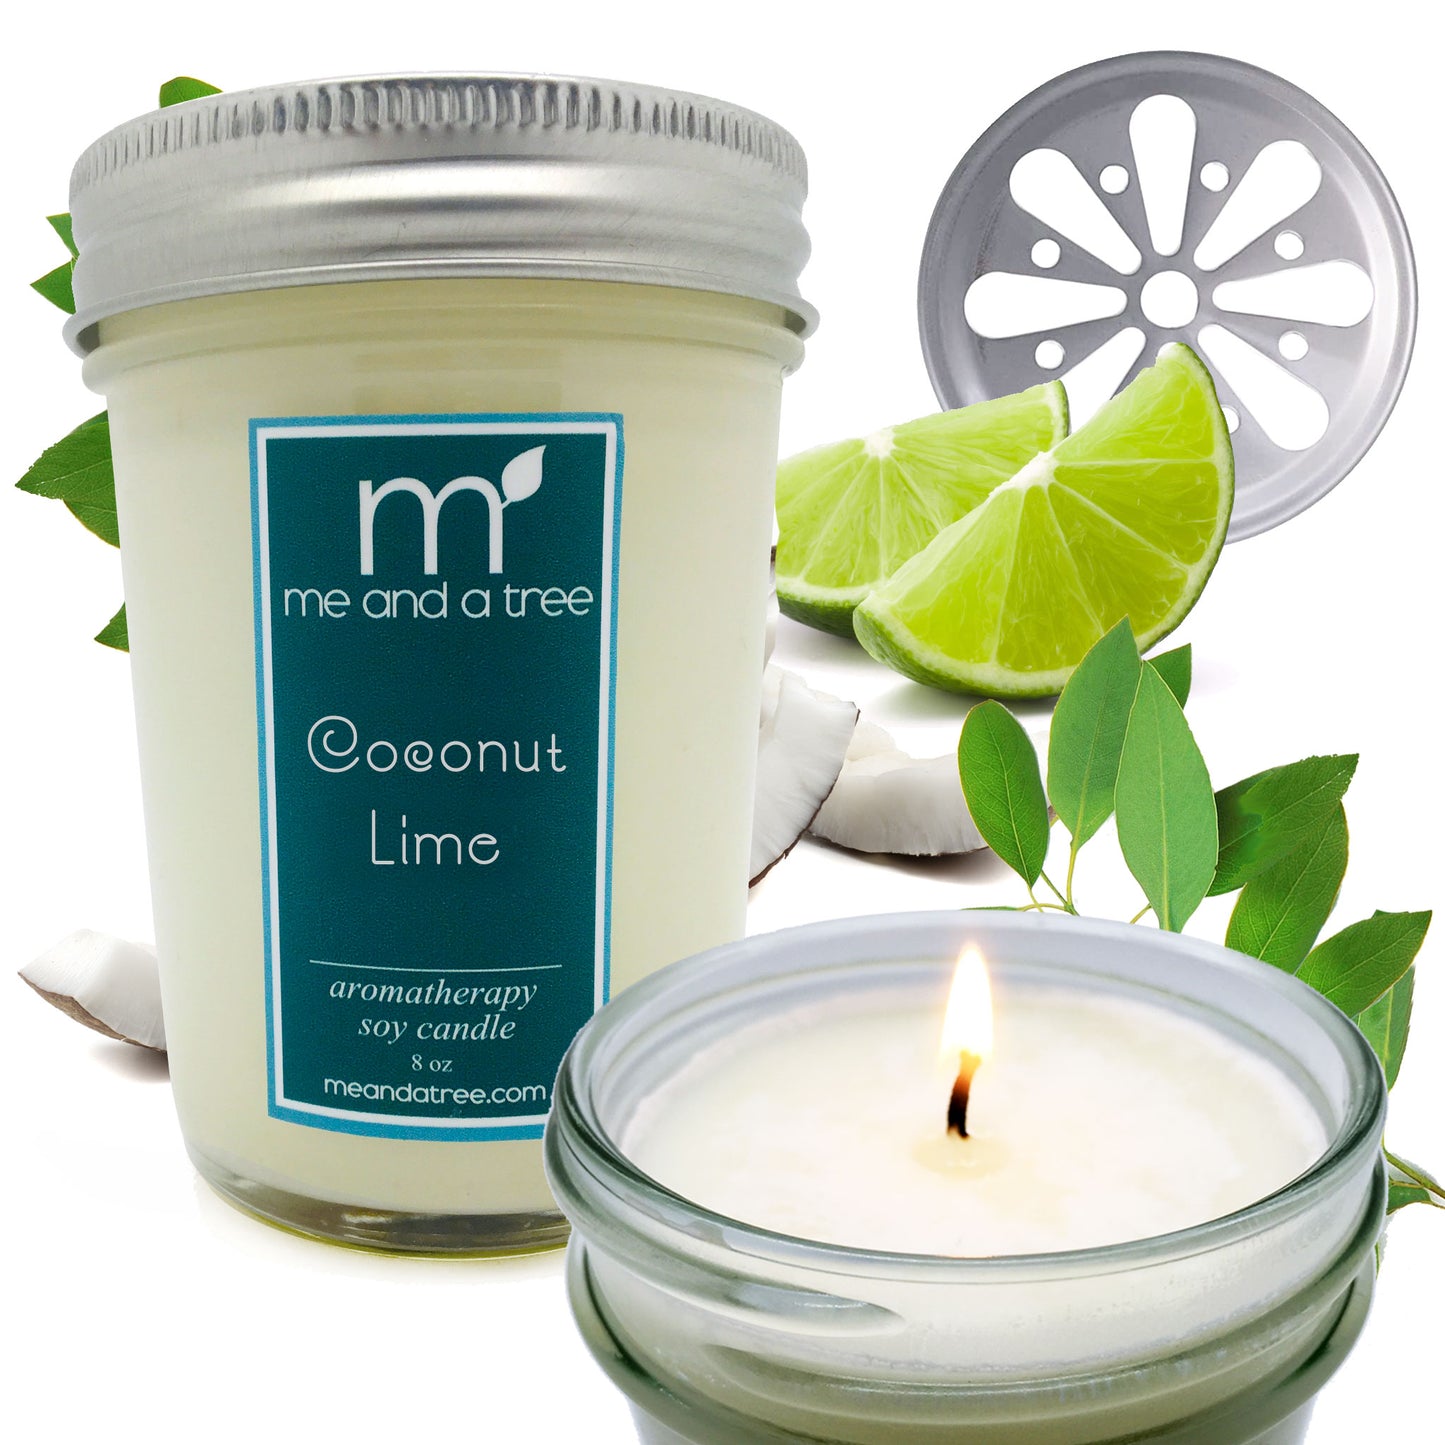 Best Coconut Lime Soy Candle with Flower-Punched Lid - Natural Soy Wax, Zesty Lime, Creamy Coconut, Vanilla Bean, Aromatherapy, Massage Candle, Home Decor